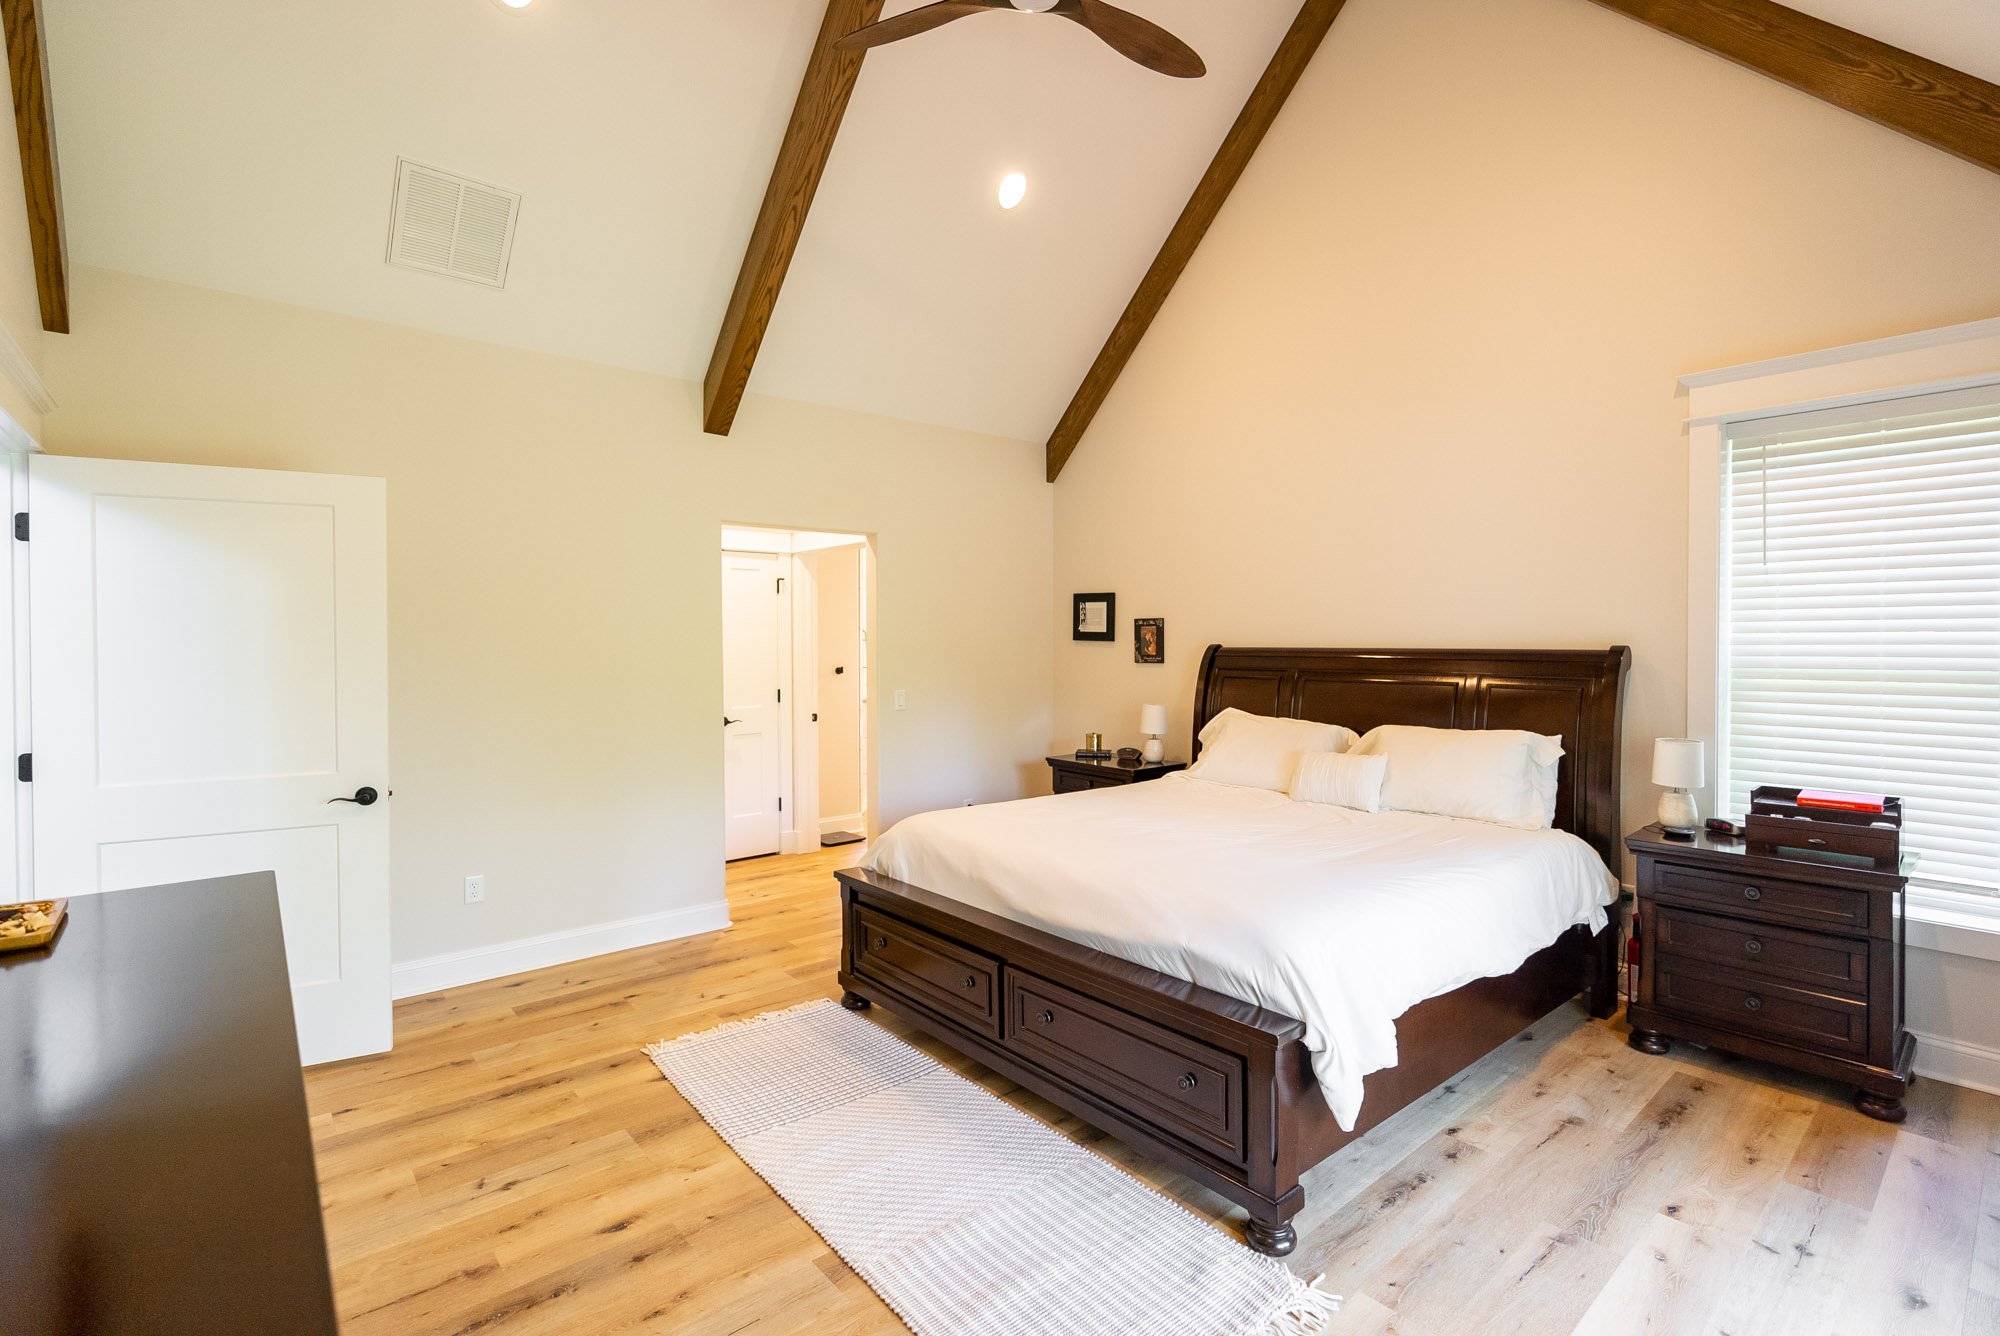 Looking for a spacious master bedroom in your custom home? Hostetter Custom Homes can create a master retreat that fits your every need.

#customhomedesign #customhomebuilder #shenandoahvalley #yourdreamhome #homedesign #custombuilders